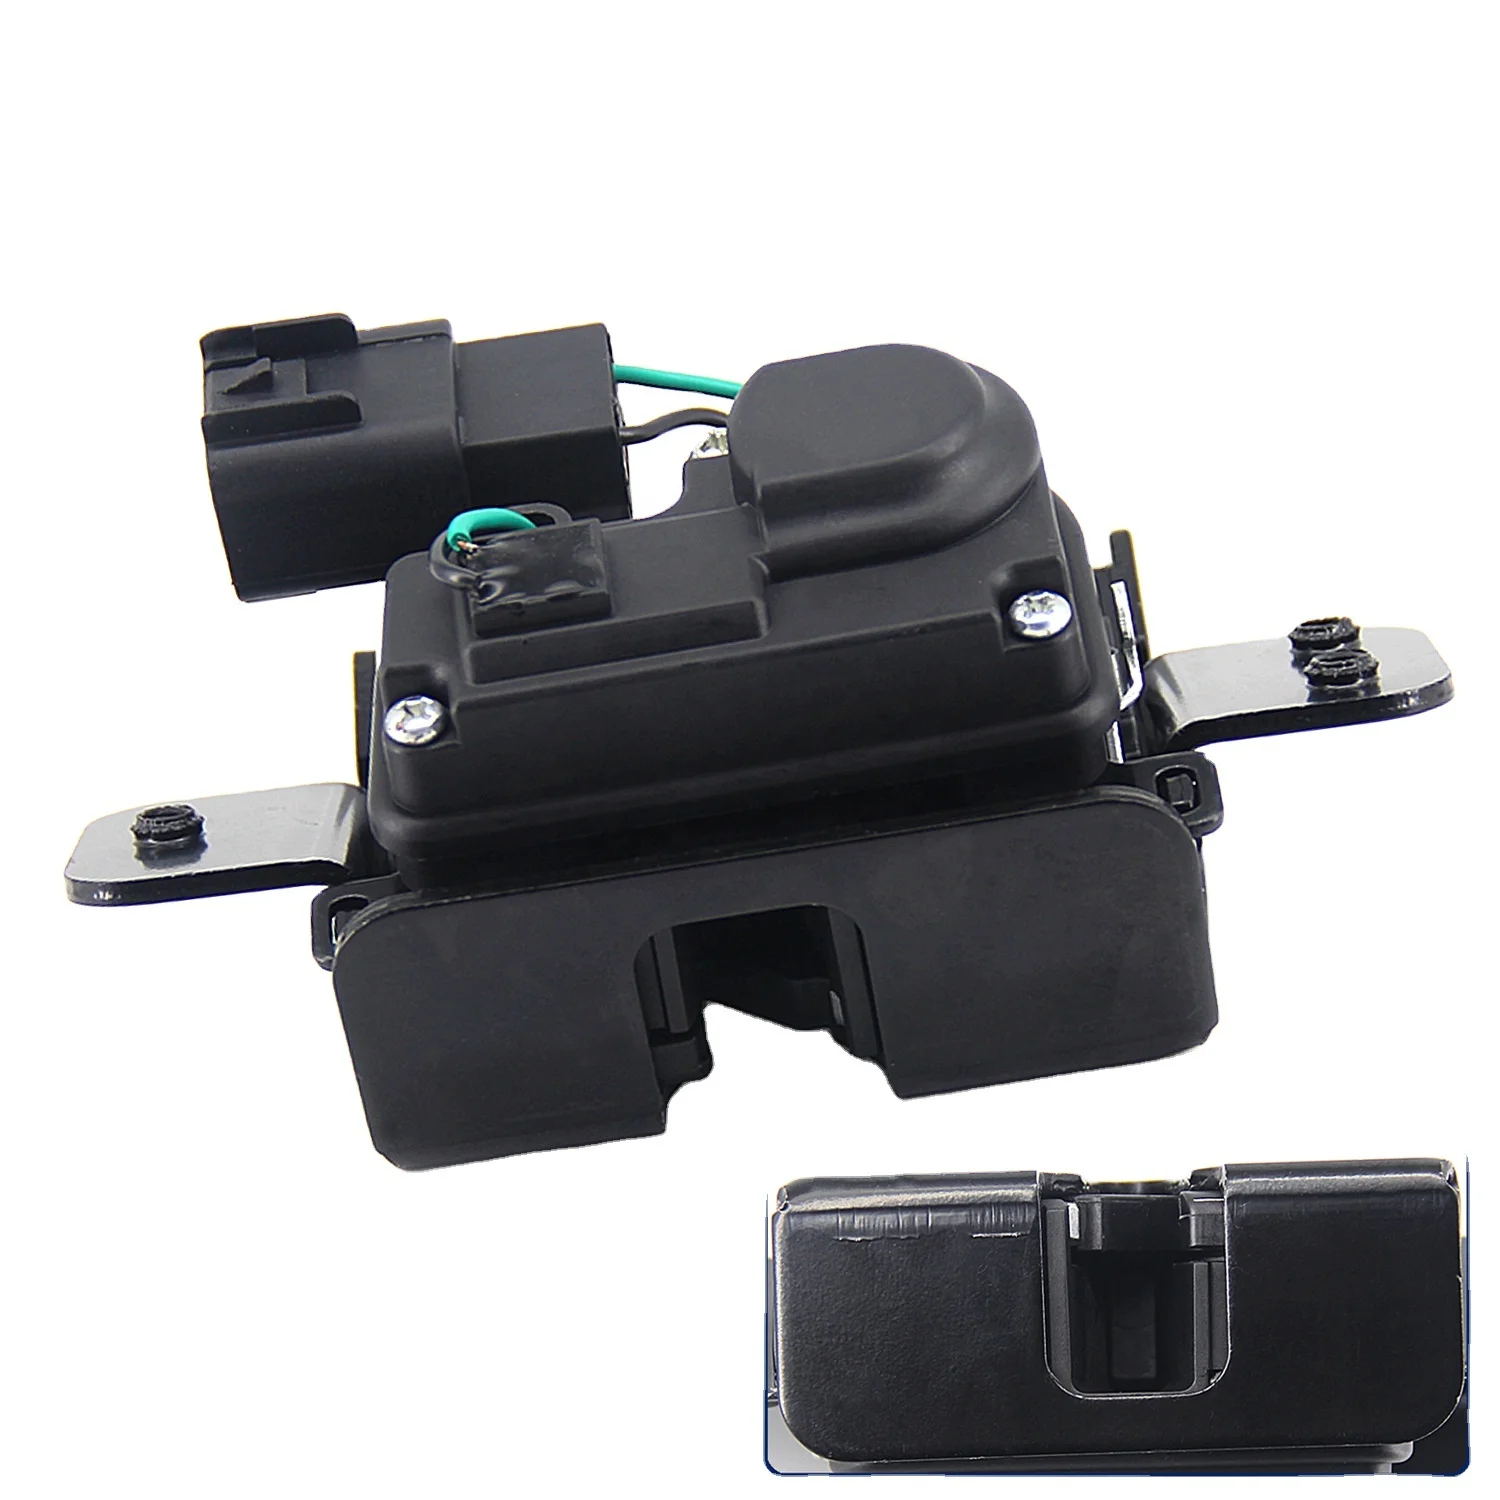 Replaces 931-299 Tailgate Hatch Latch Actuator Compatible with Buick Chevy GMC Cadillac Pontiac Rear Liftgate Door Lock Actuator